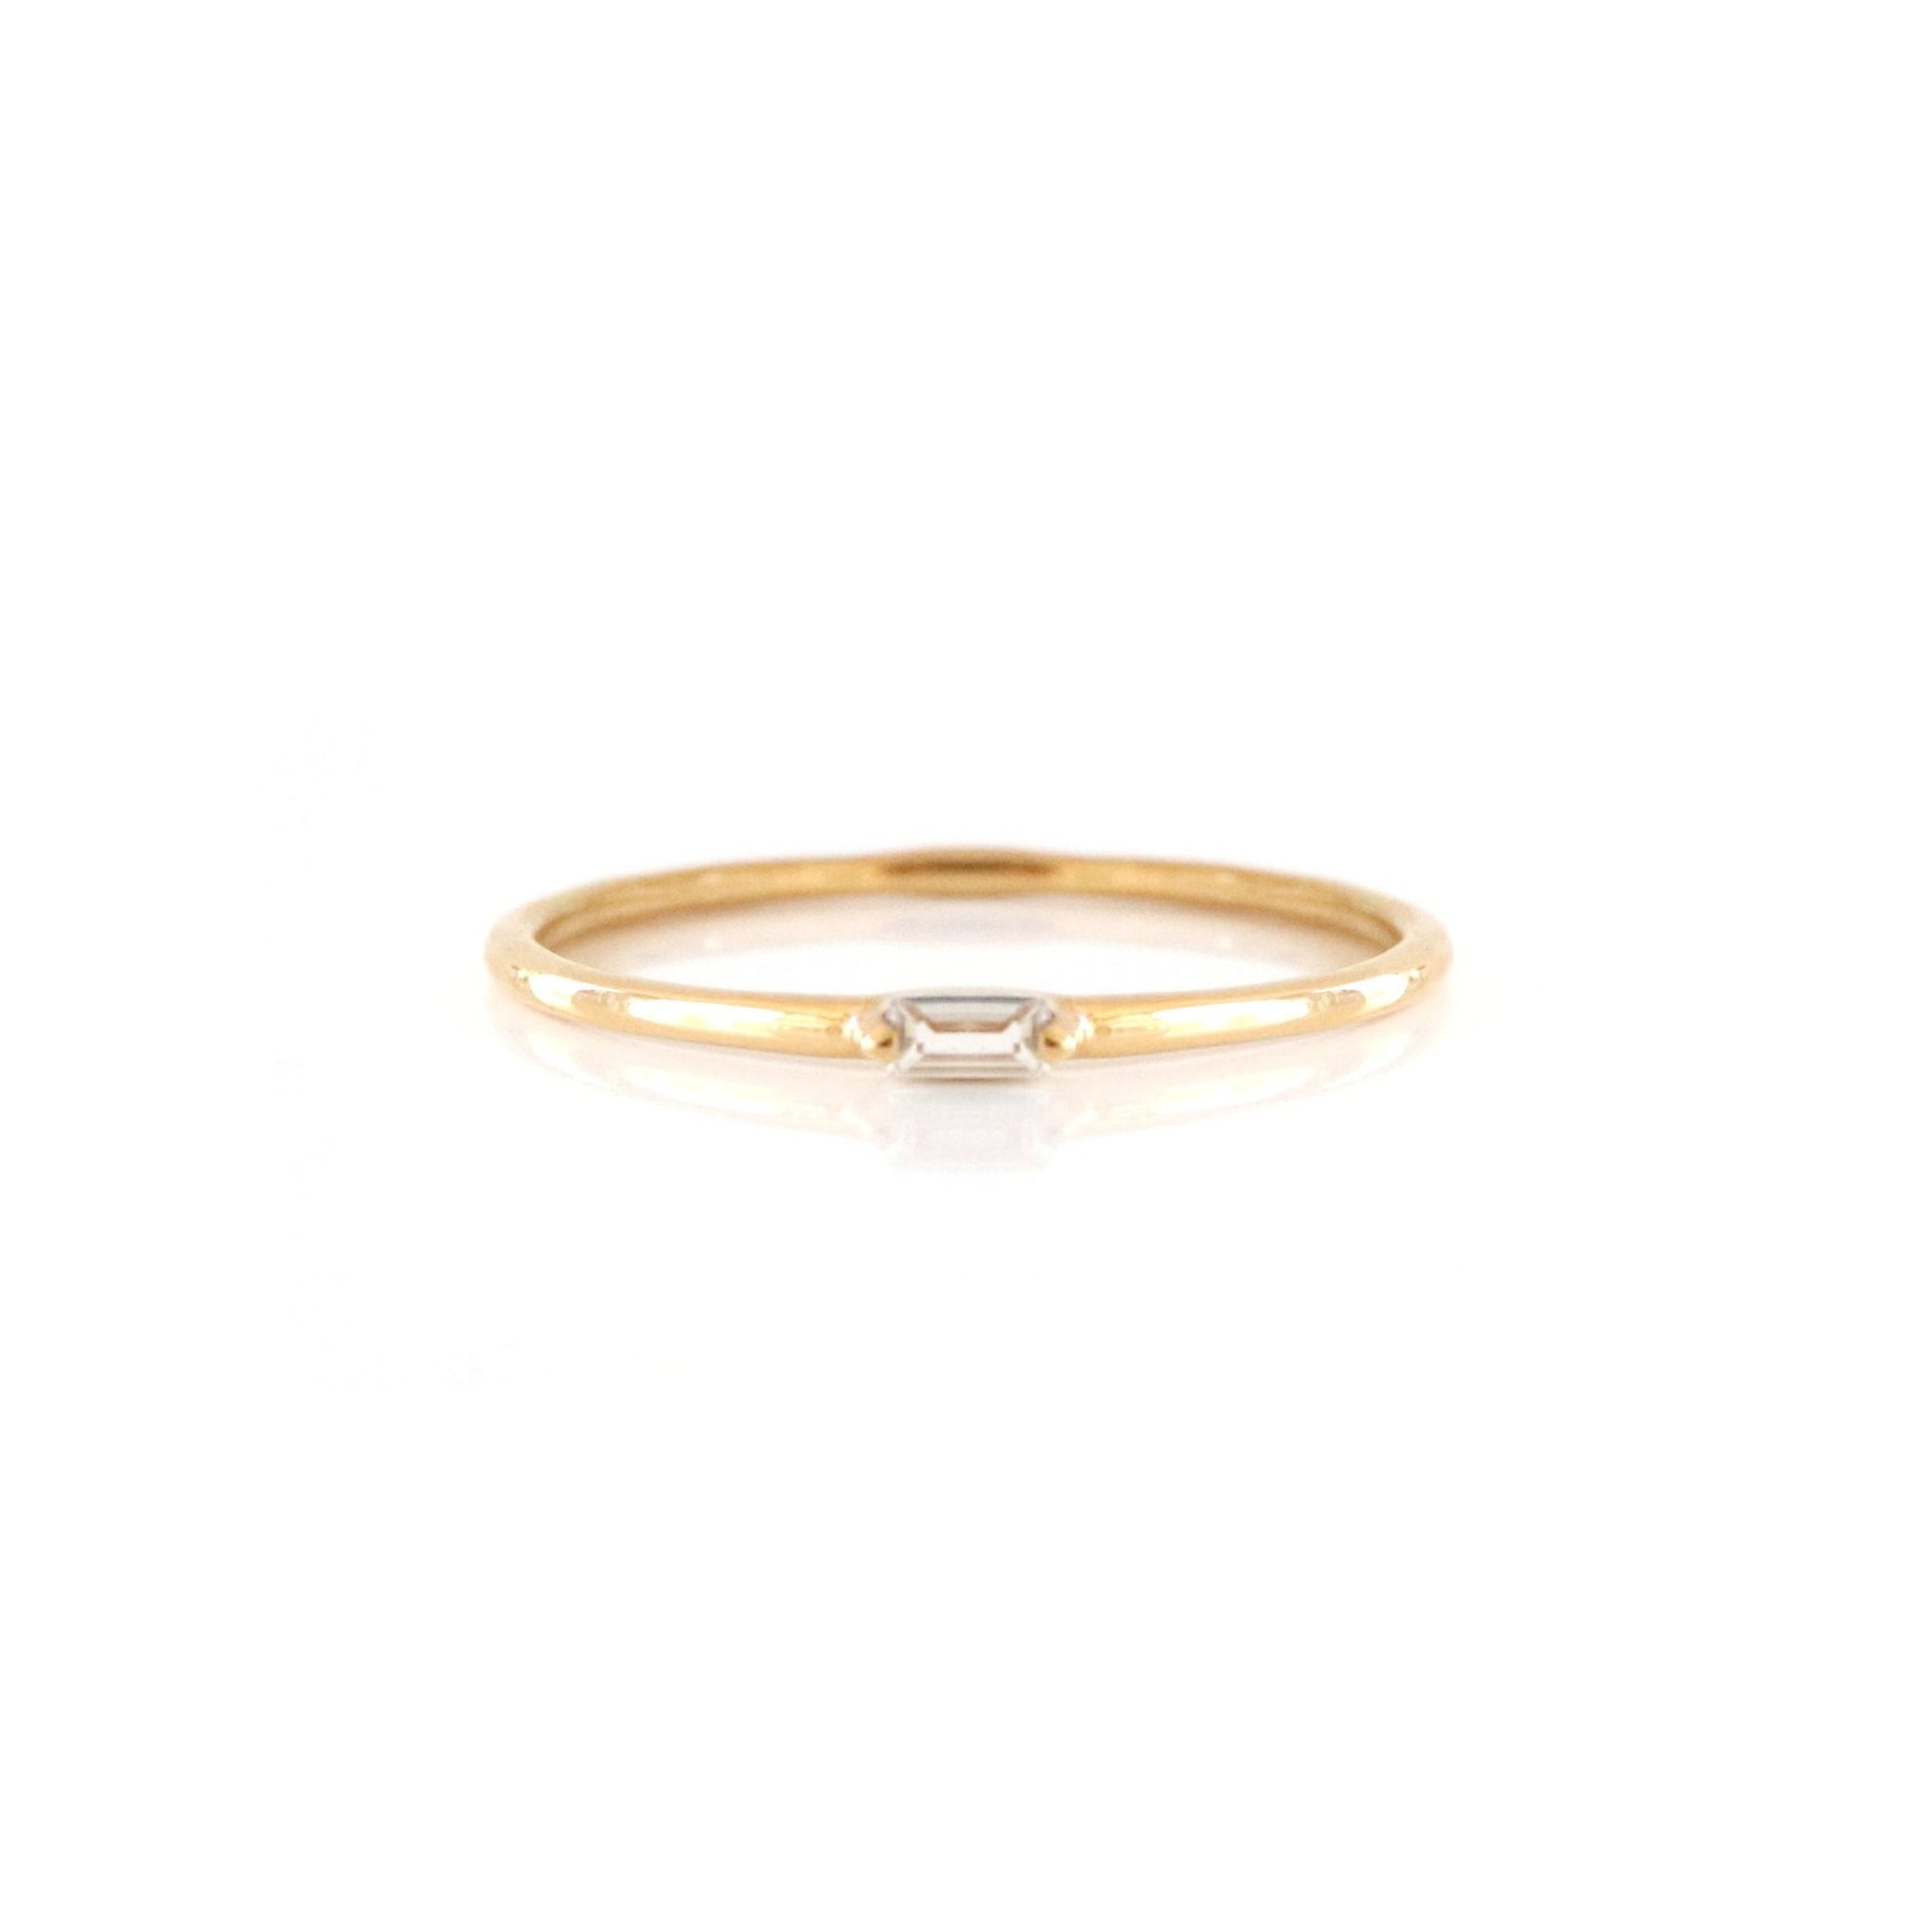 Loyal Solitaire Stacking Ring - White Topaz & Gold - SO PRETTY CARA COTTER